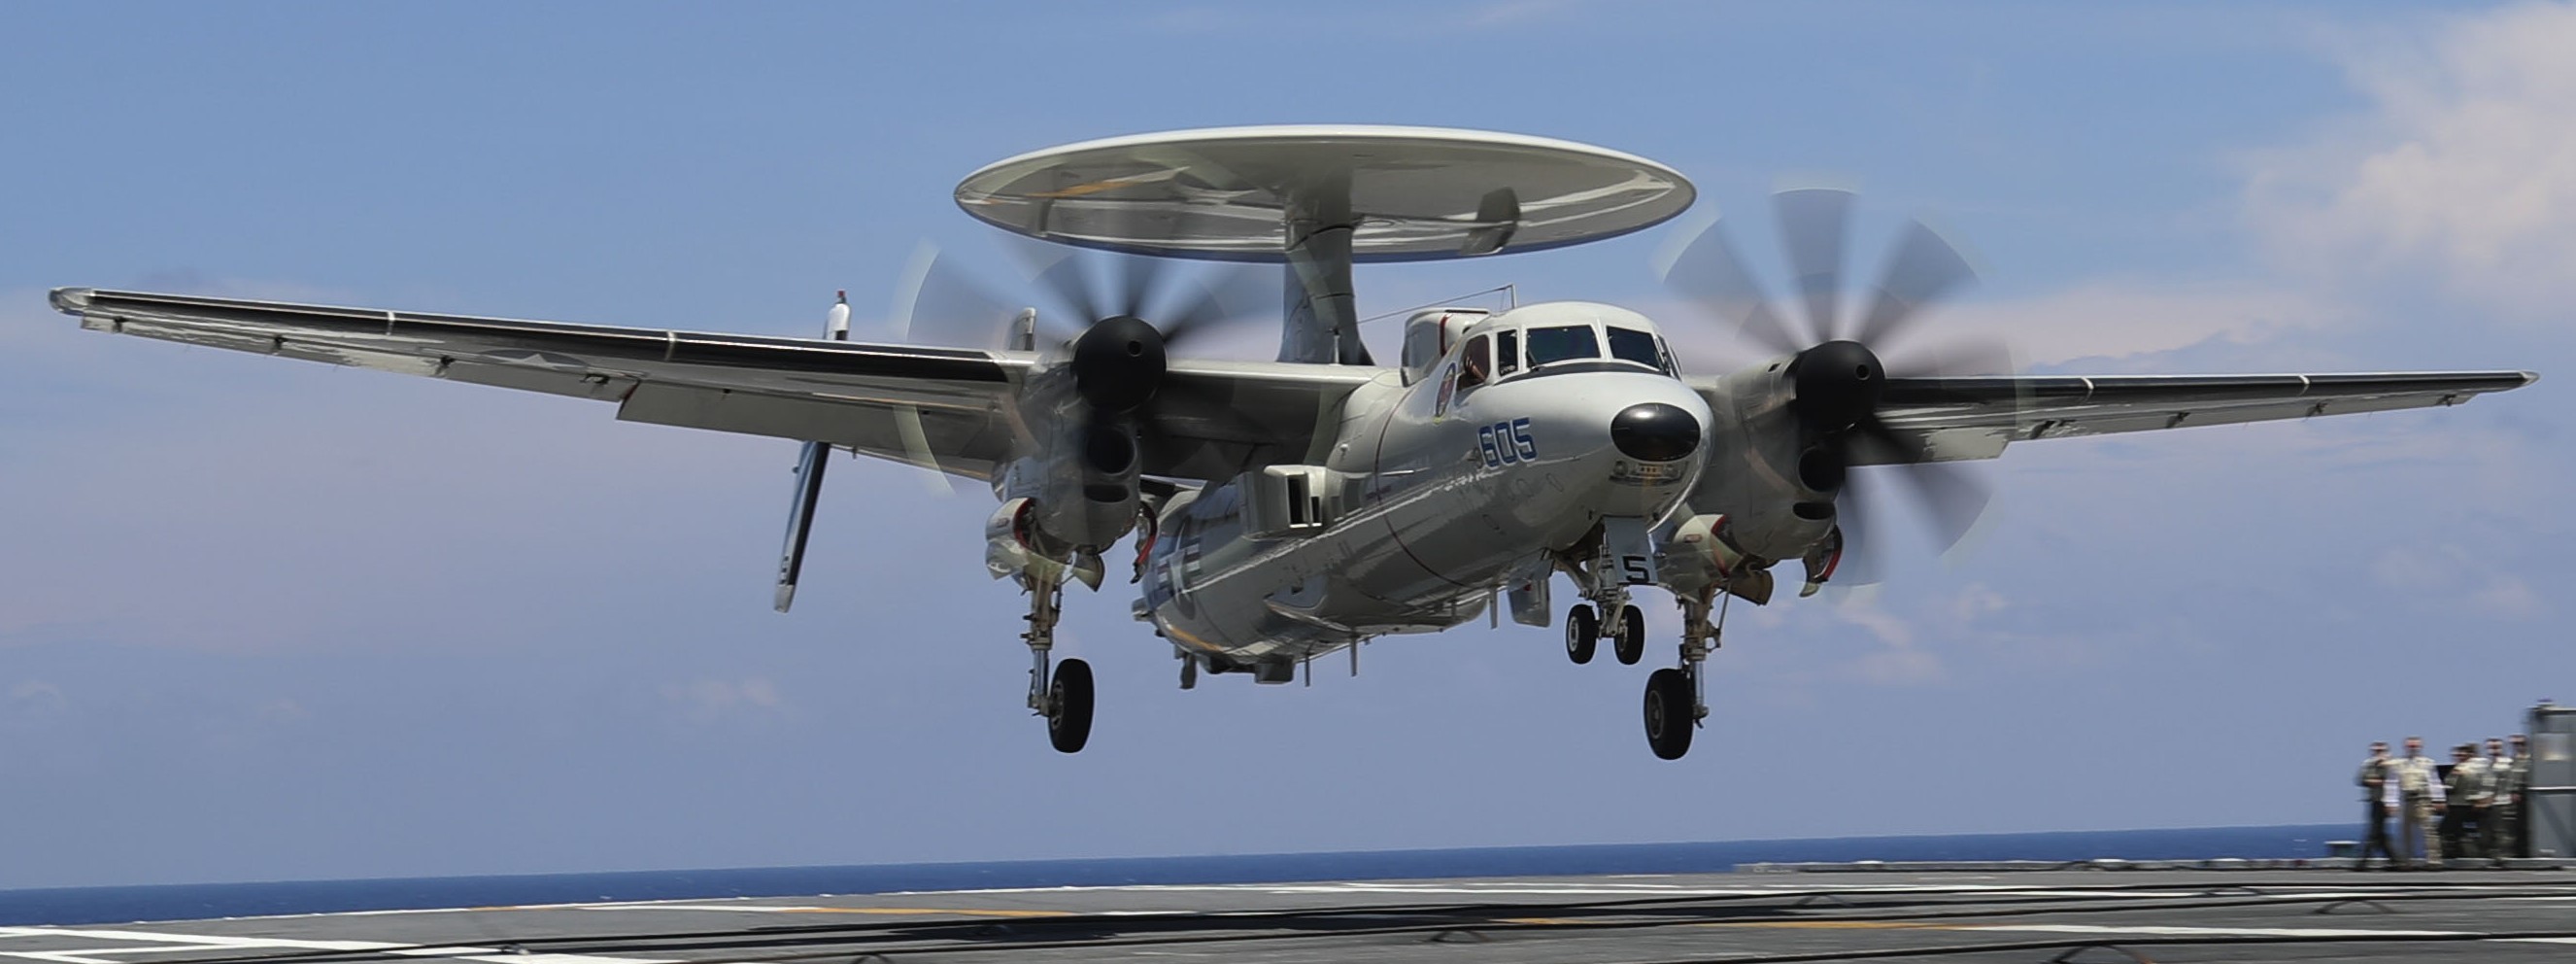 vaw-121 bluetails carrier airborne early warning squadron us navy e-2d advanced hawkeye cvw-7 uss abraham lincoln cvn-72 51